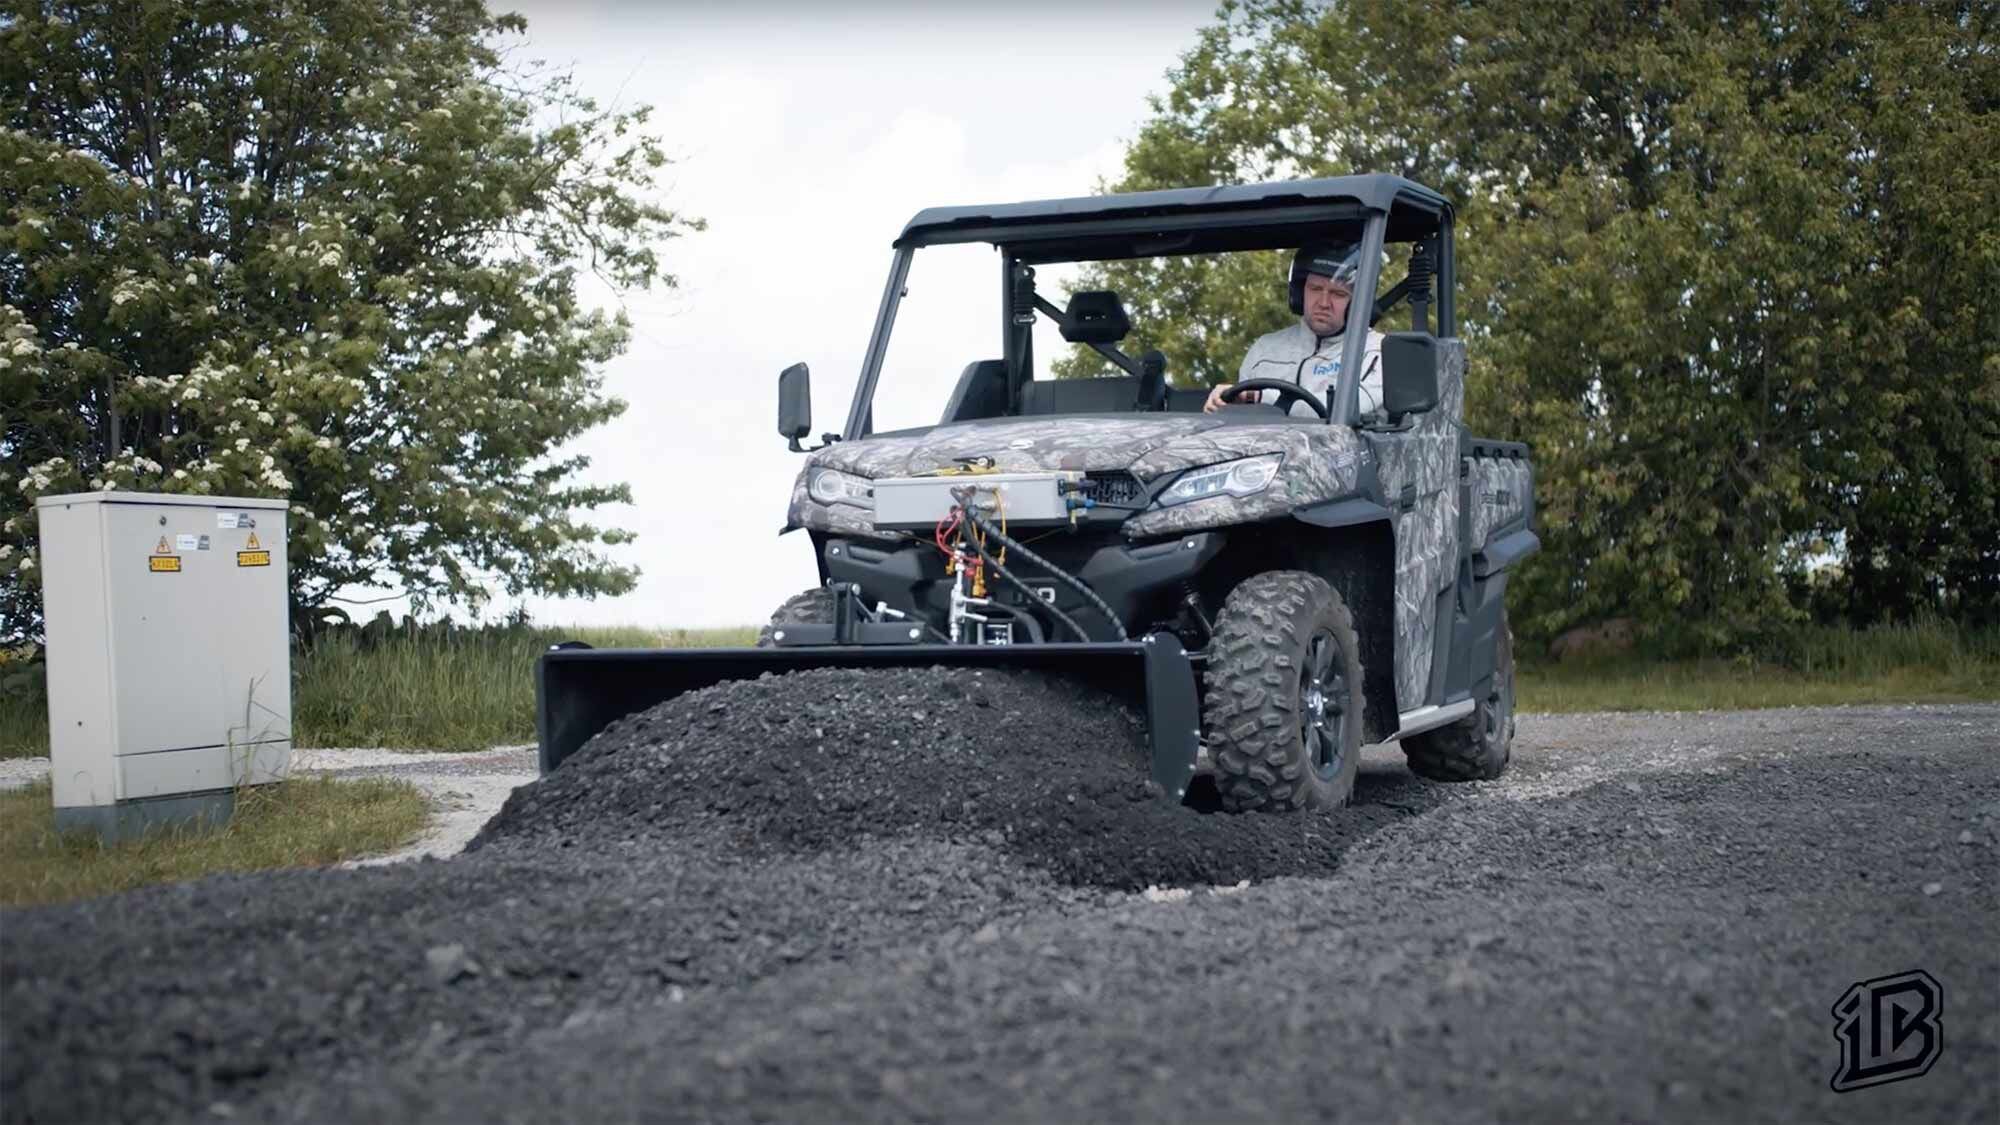 The plow bucket fits to the front of most UTVs and allows for material handling.